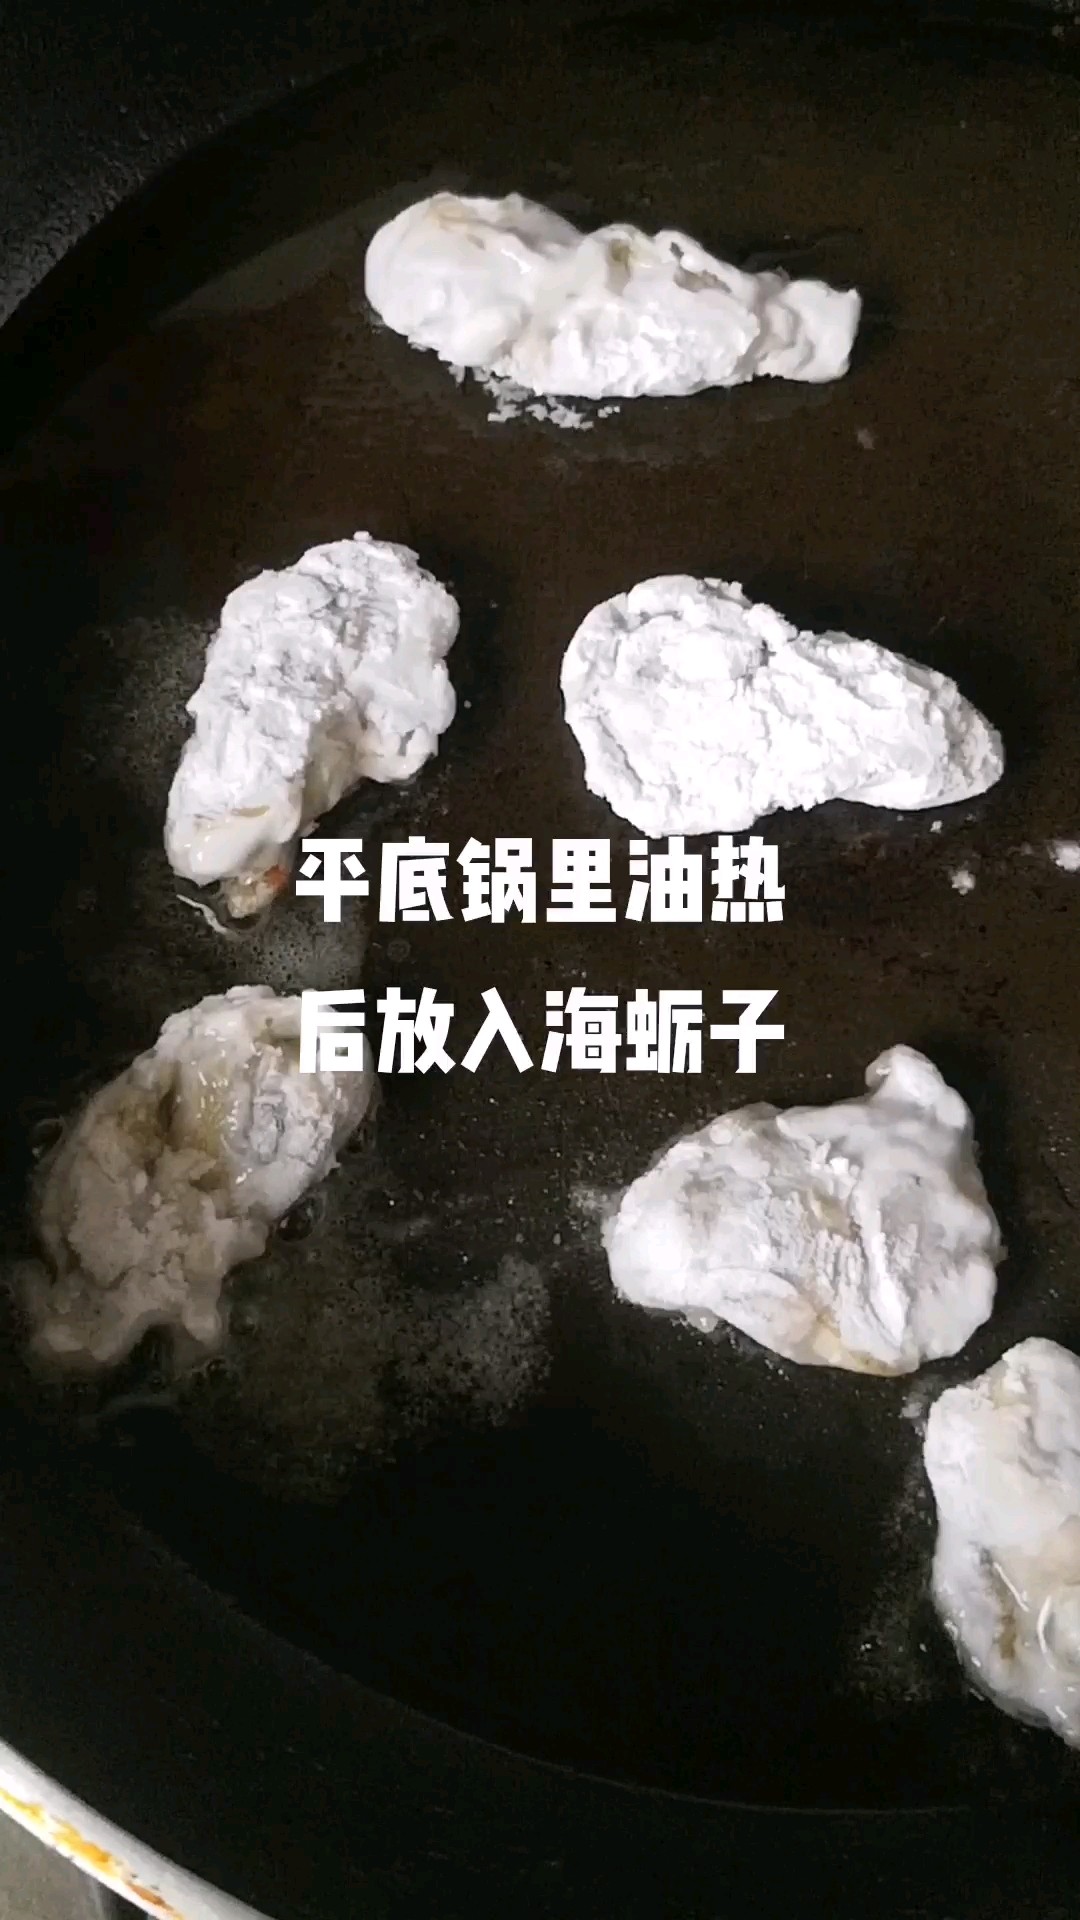 Pan Fried Sea Oysters recipe